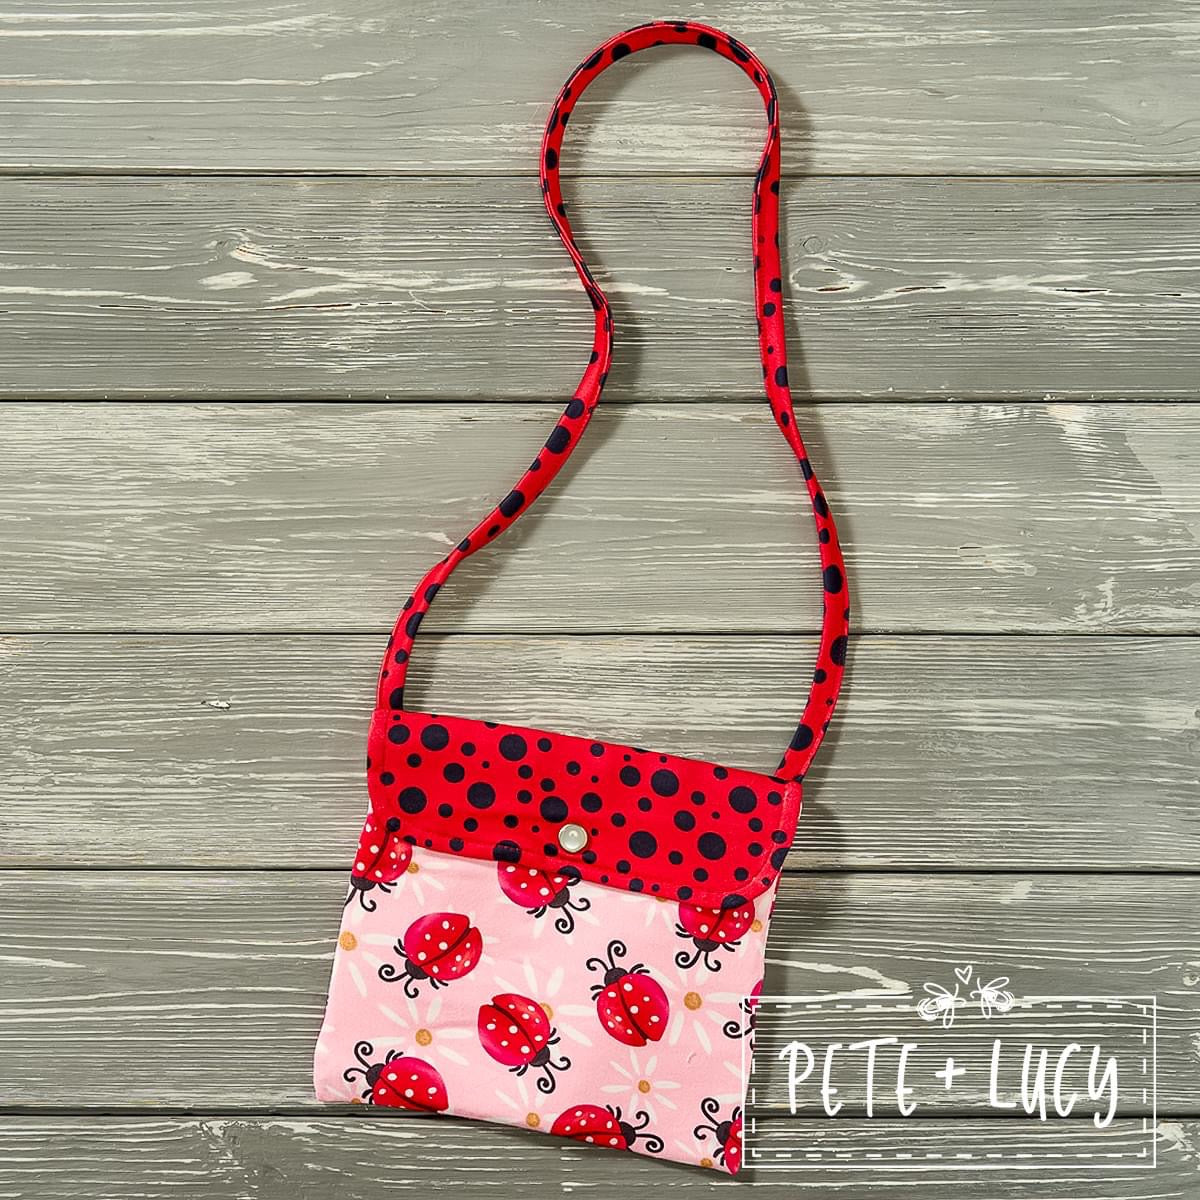 Ladybug + Daisy Purse by Pete and Lucy